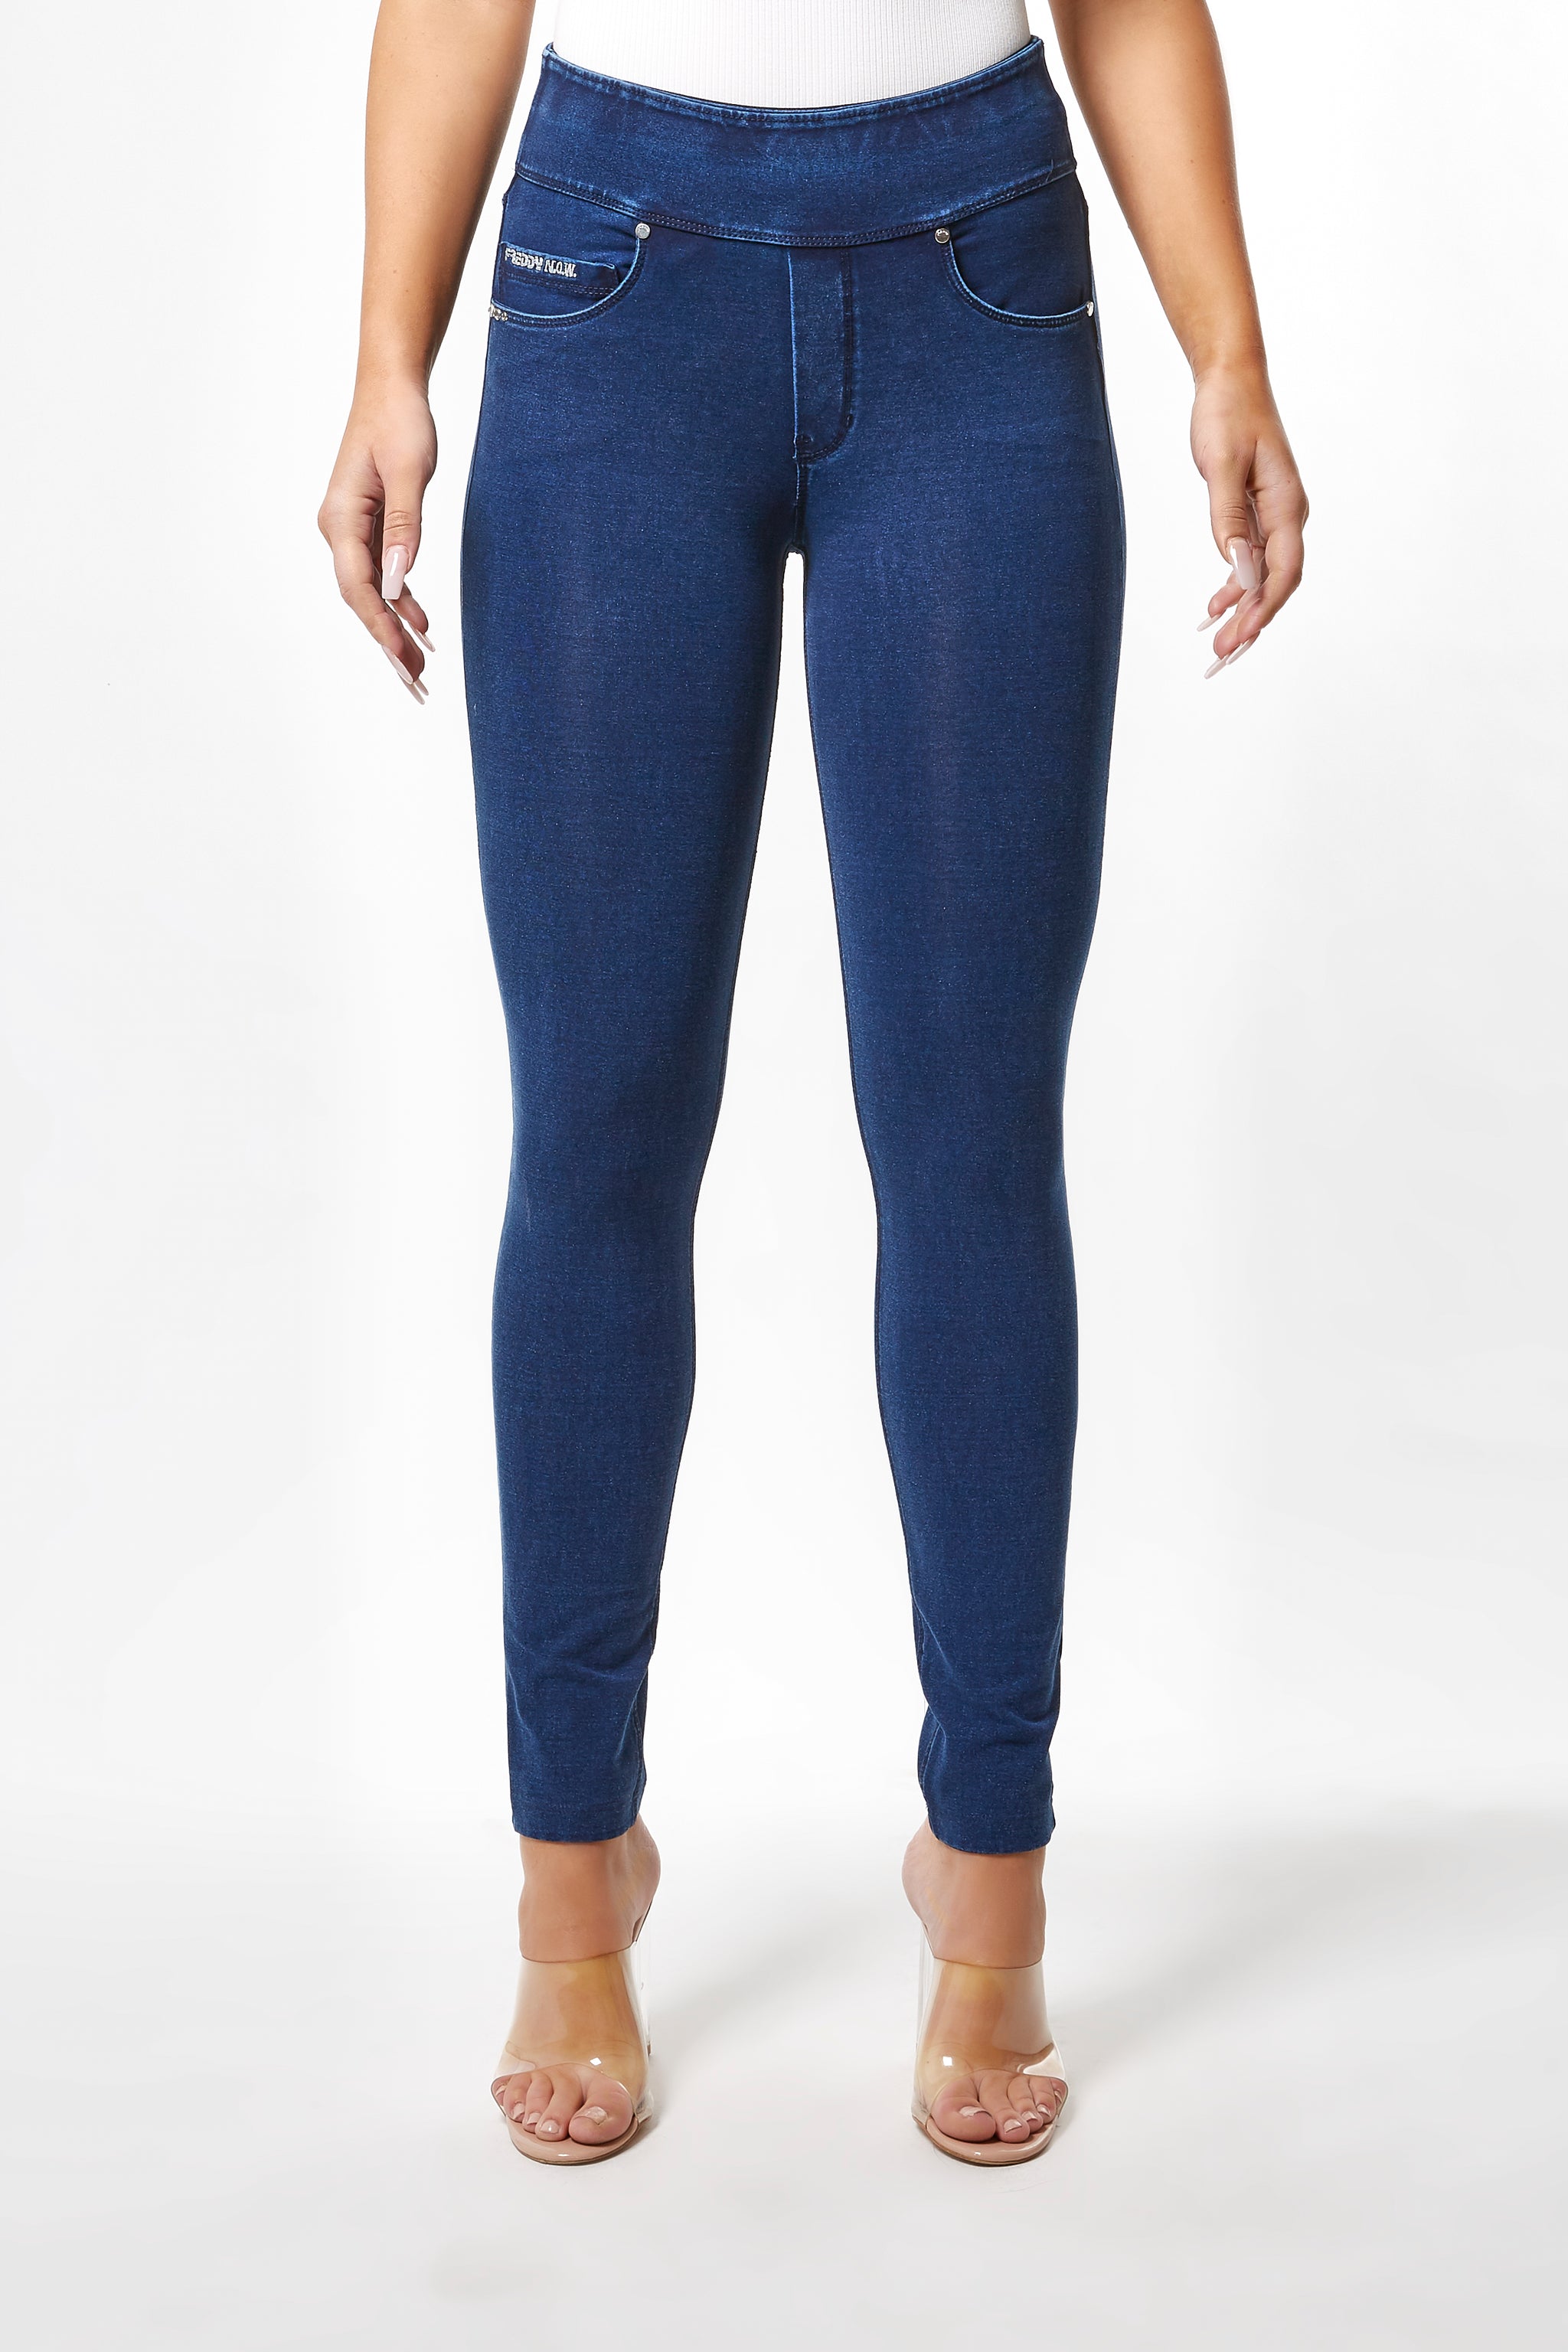 Ami Skinny Jeans With Double-Button Waistband - New Wave Blue